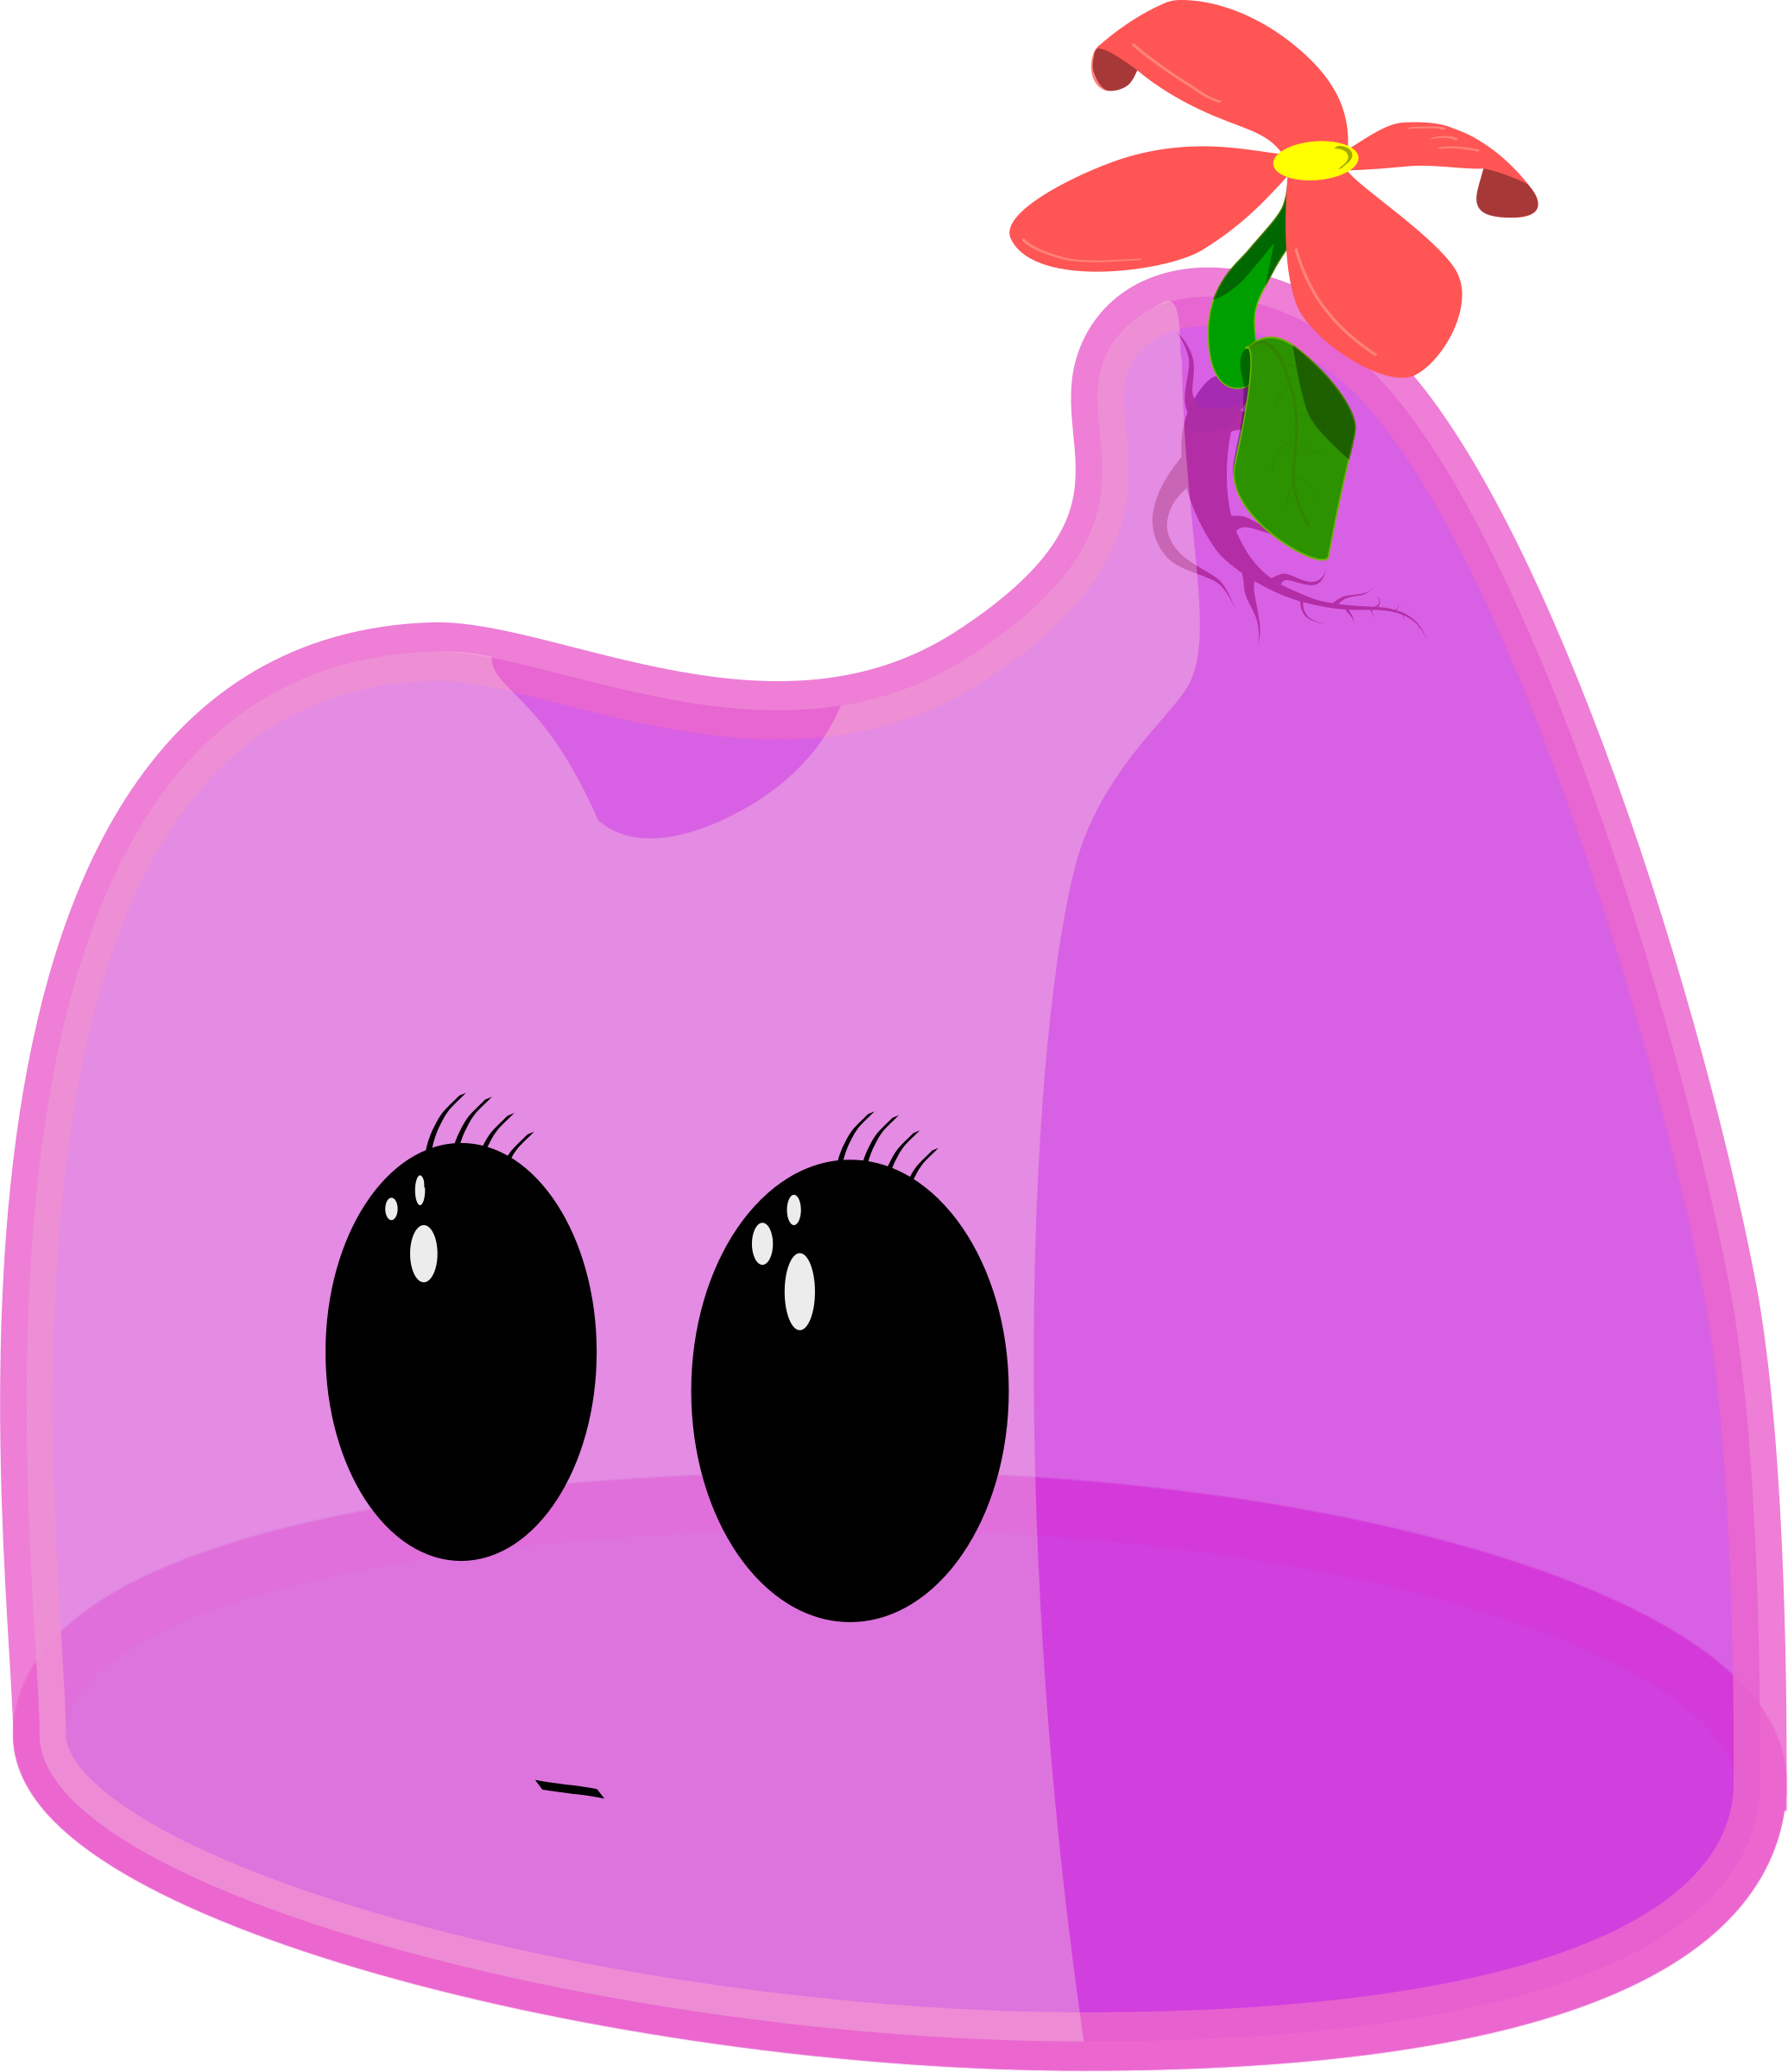 Clipart - jelly